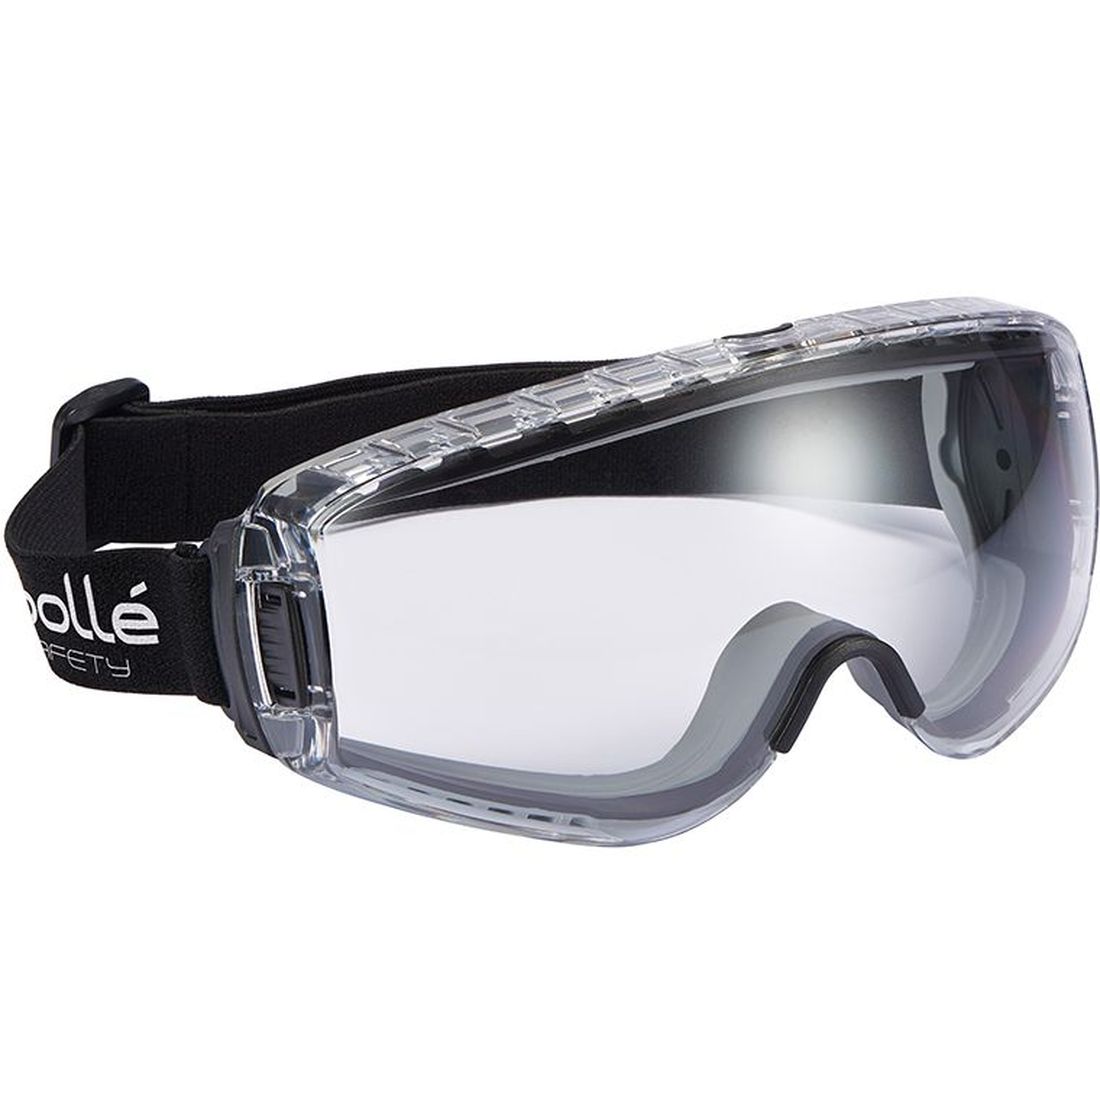 Bolle Safety PILOT PLATINUM Ventilated Safety Goggles - Clear                               